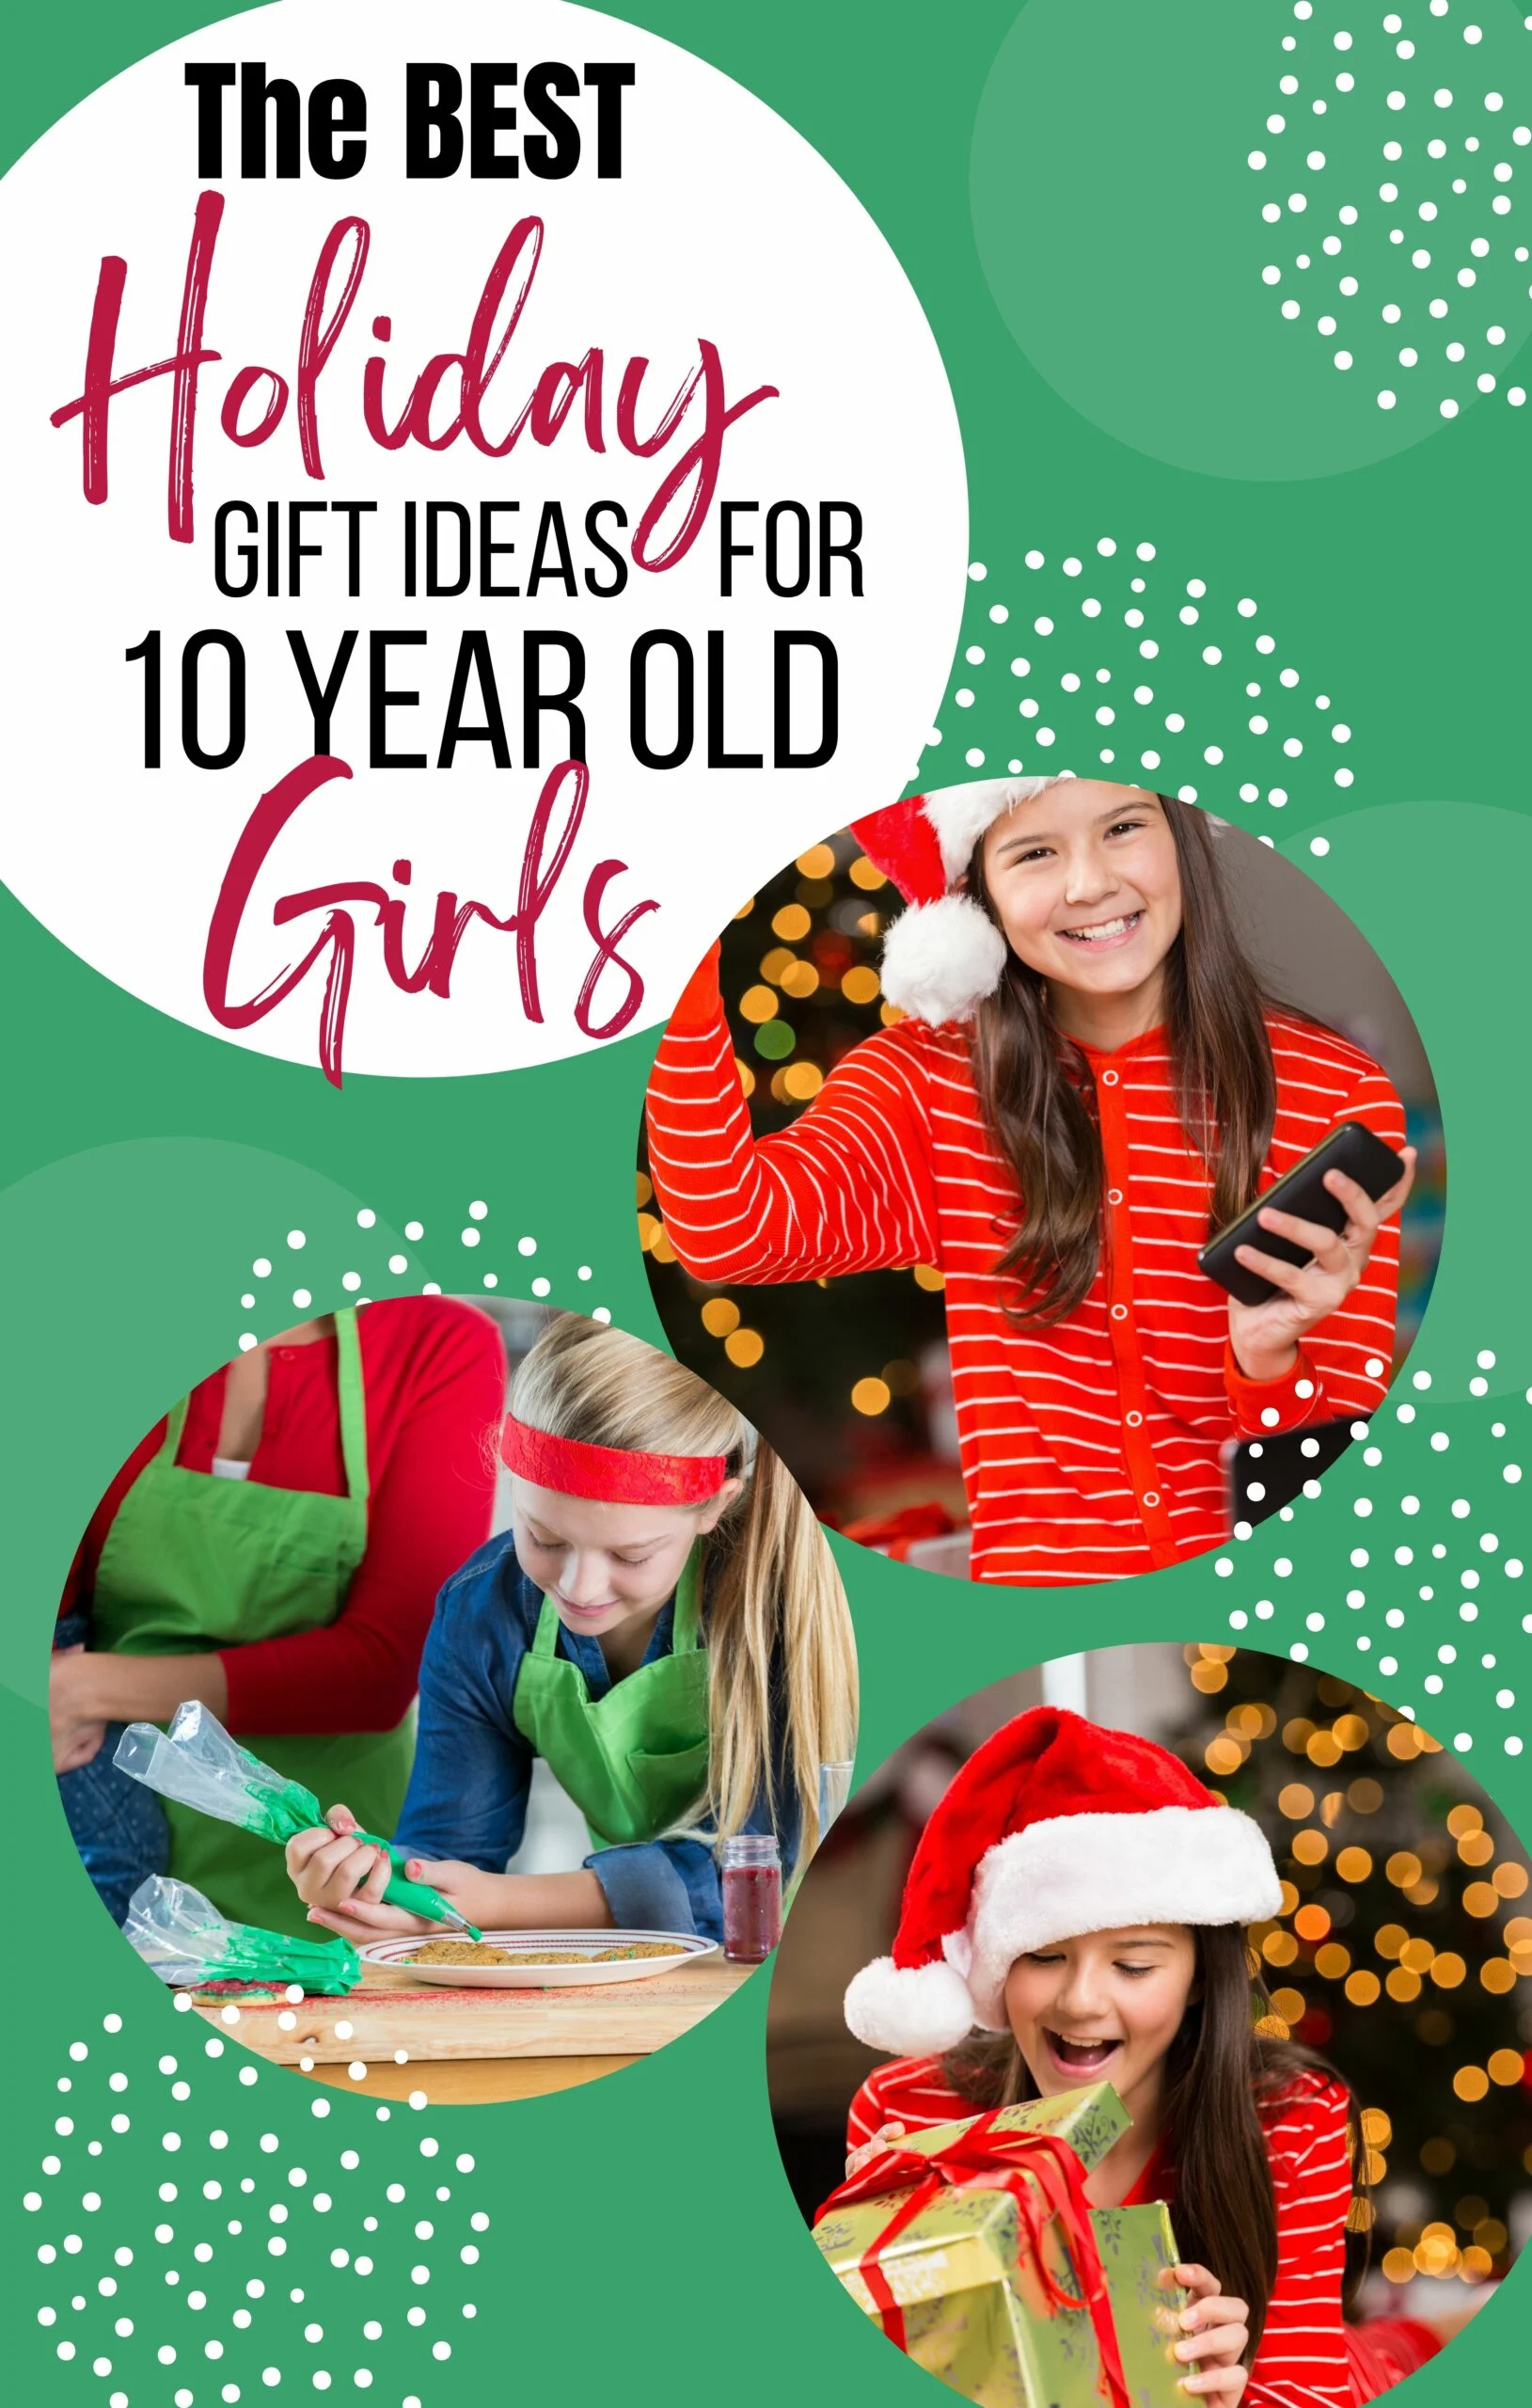 Christmas Gift Ideas for 10 Year Old Girls 1 scaled Best Gifts for 10 Year Old Girls Shopping for a preteen girl and just not sure what to get? Here are 20 of the BEST gifts for 10 year old girls and above. She's sure to adore one of these fabulous gifts!